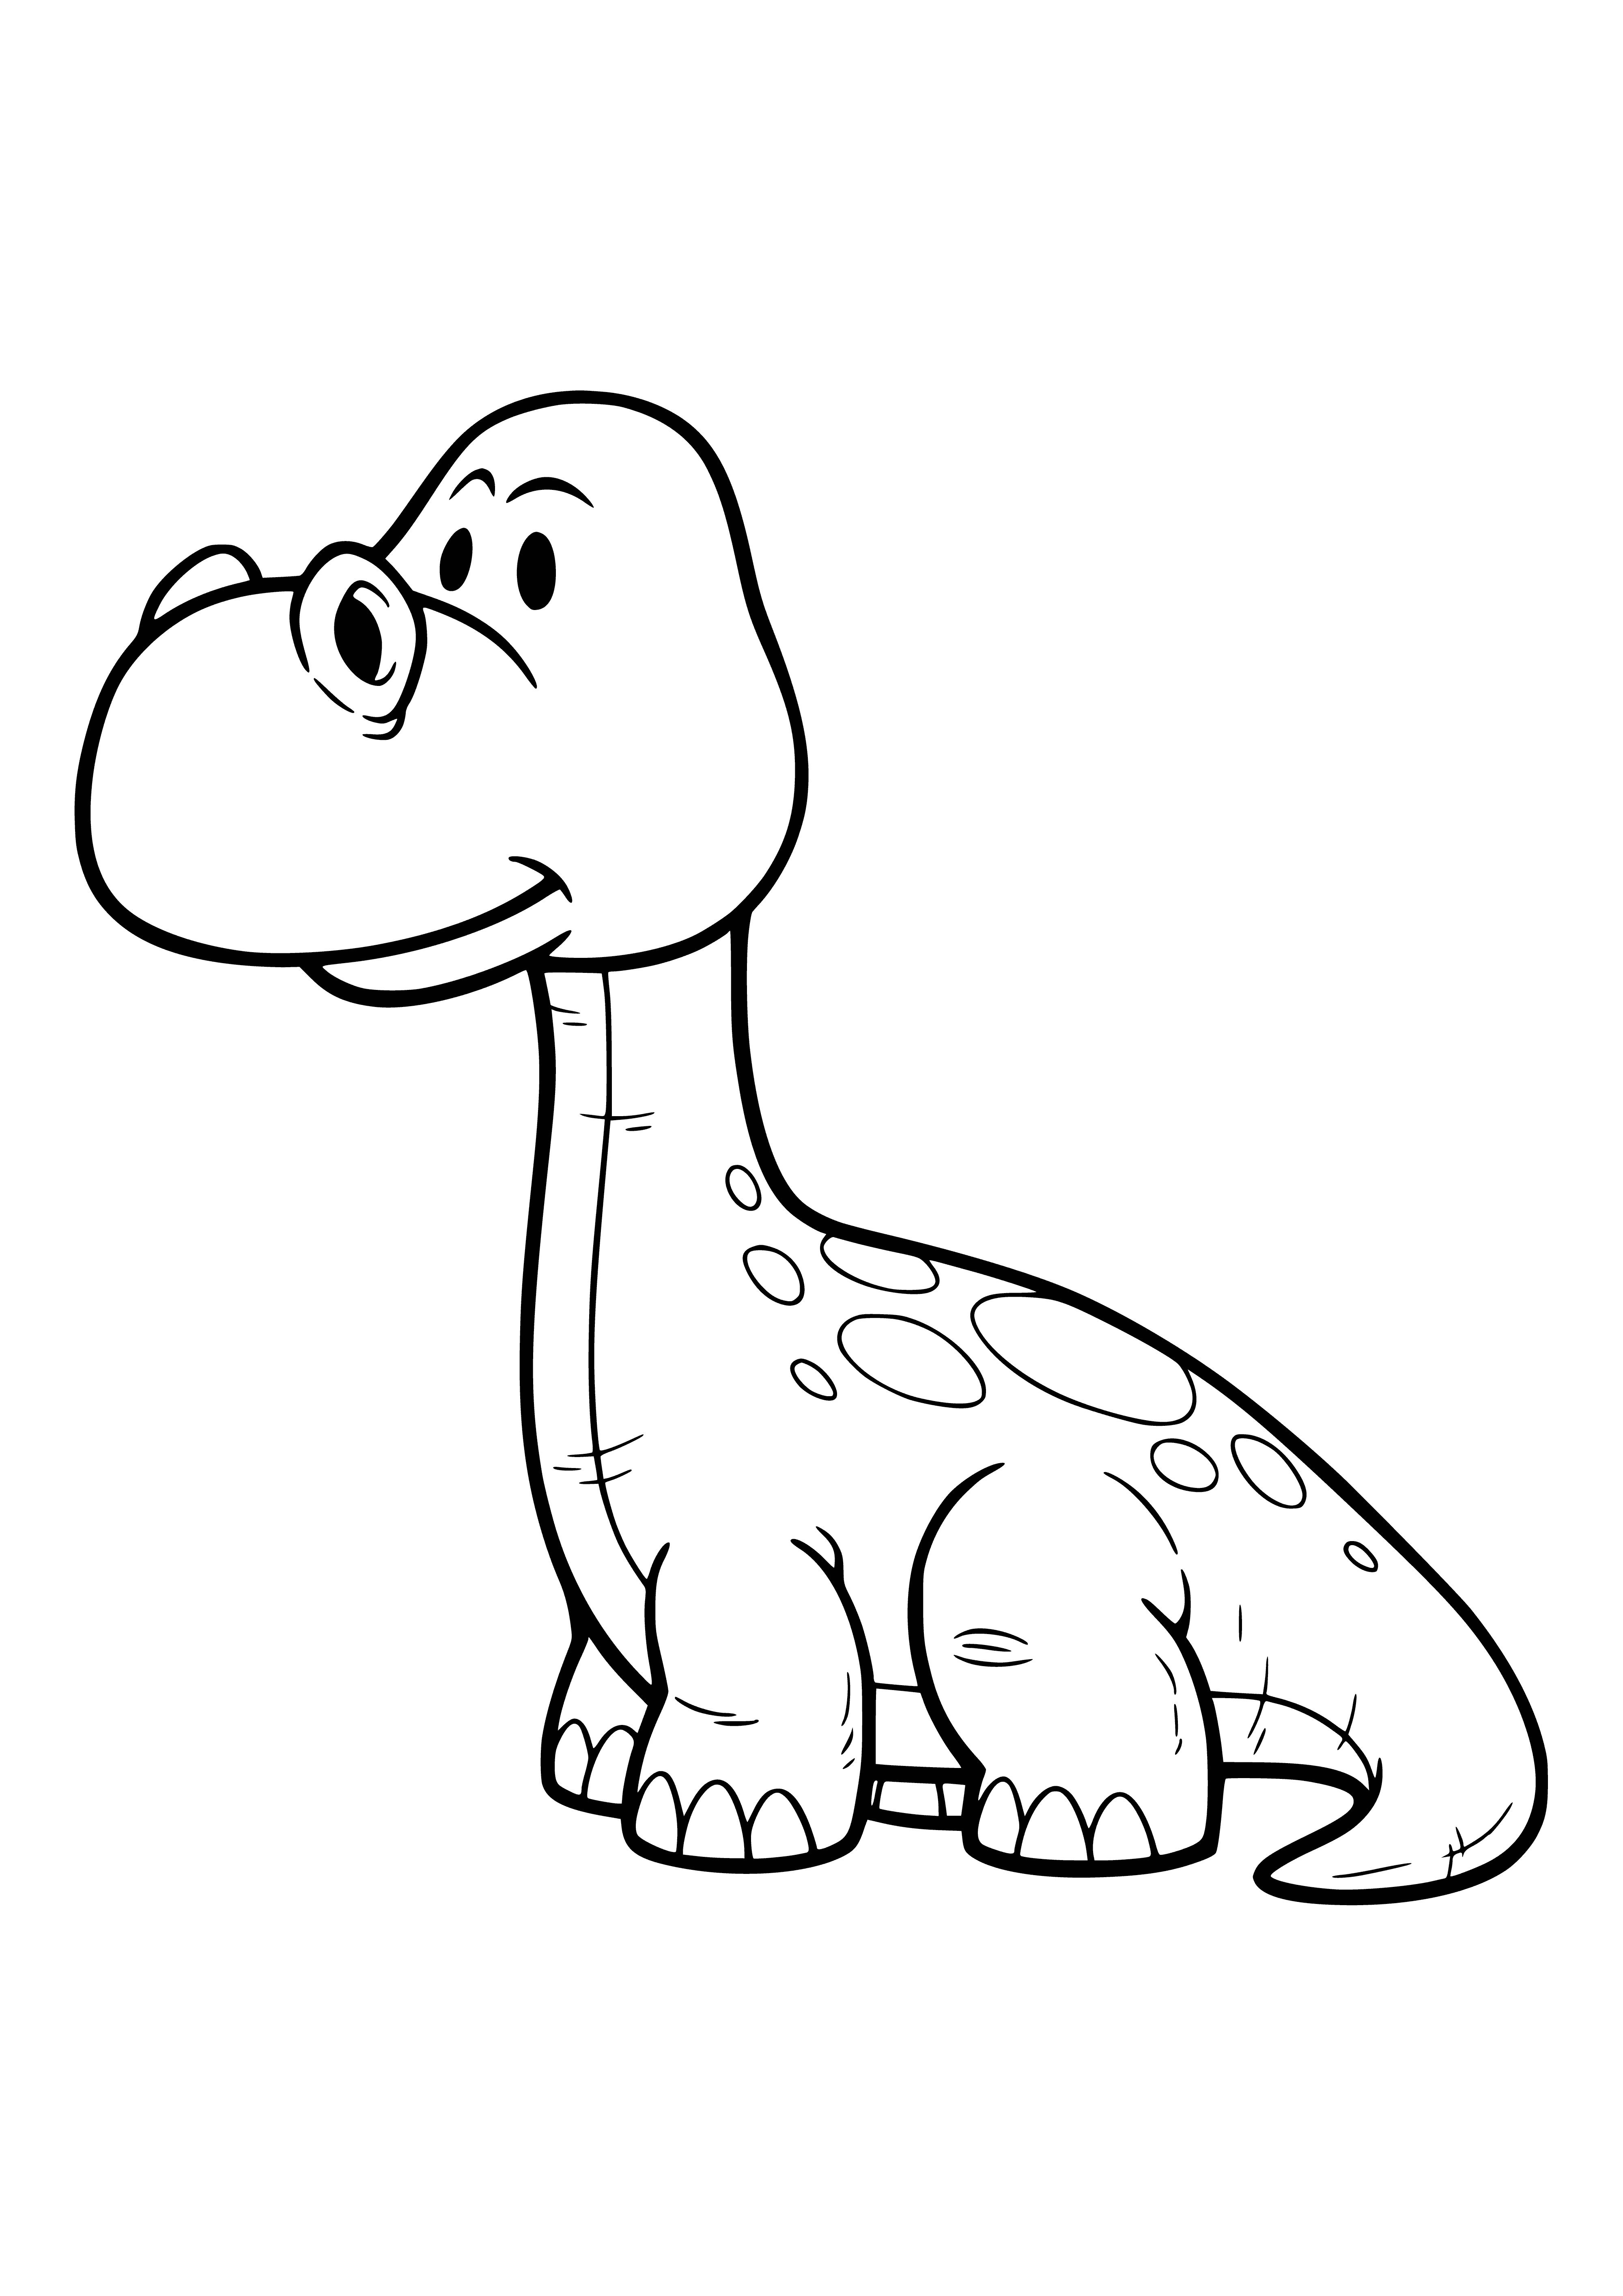 coloring page: The Apatosaurus is a large, gray dino with a long neck, beak-like mouth and thick, clawed feet. #Dinosaurs